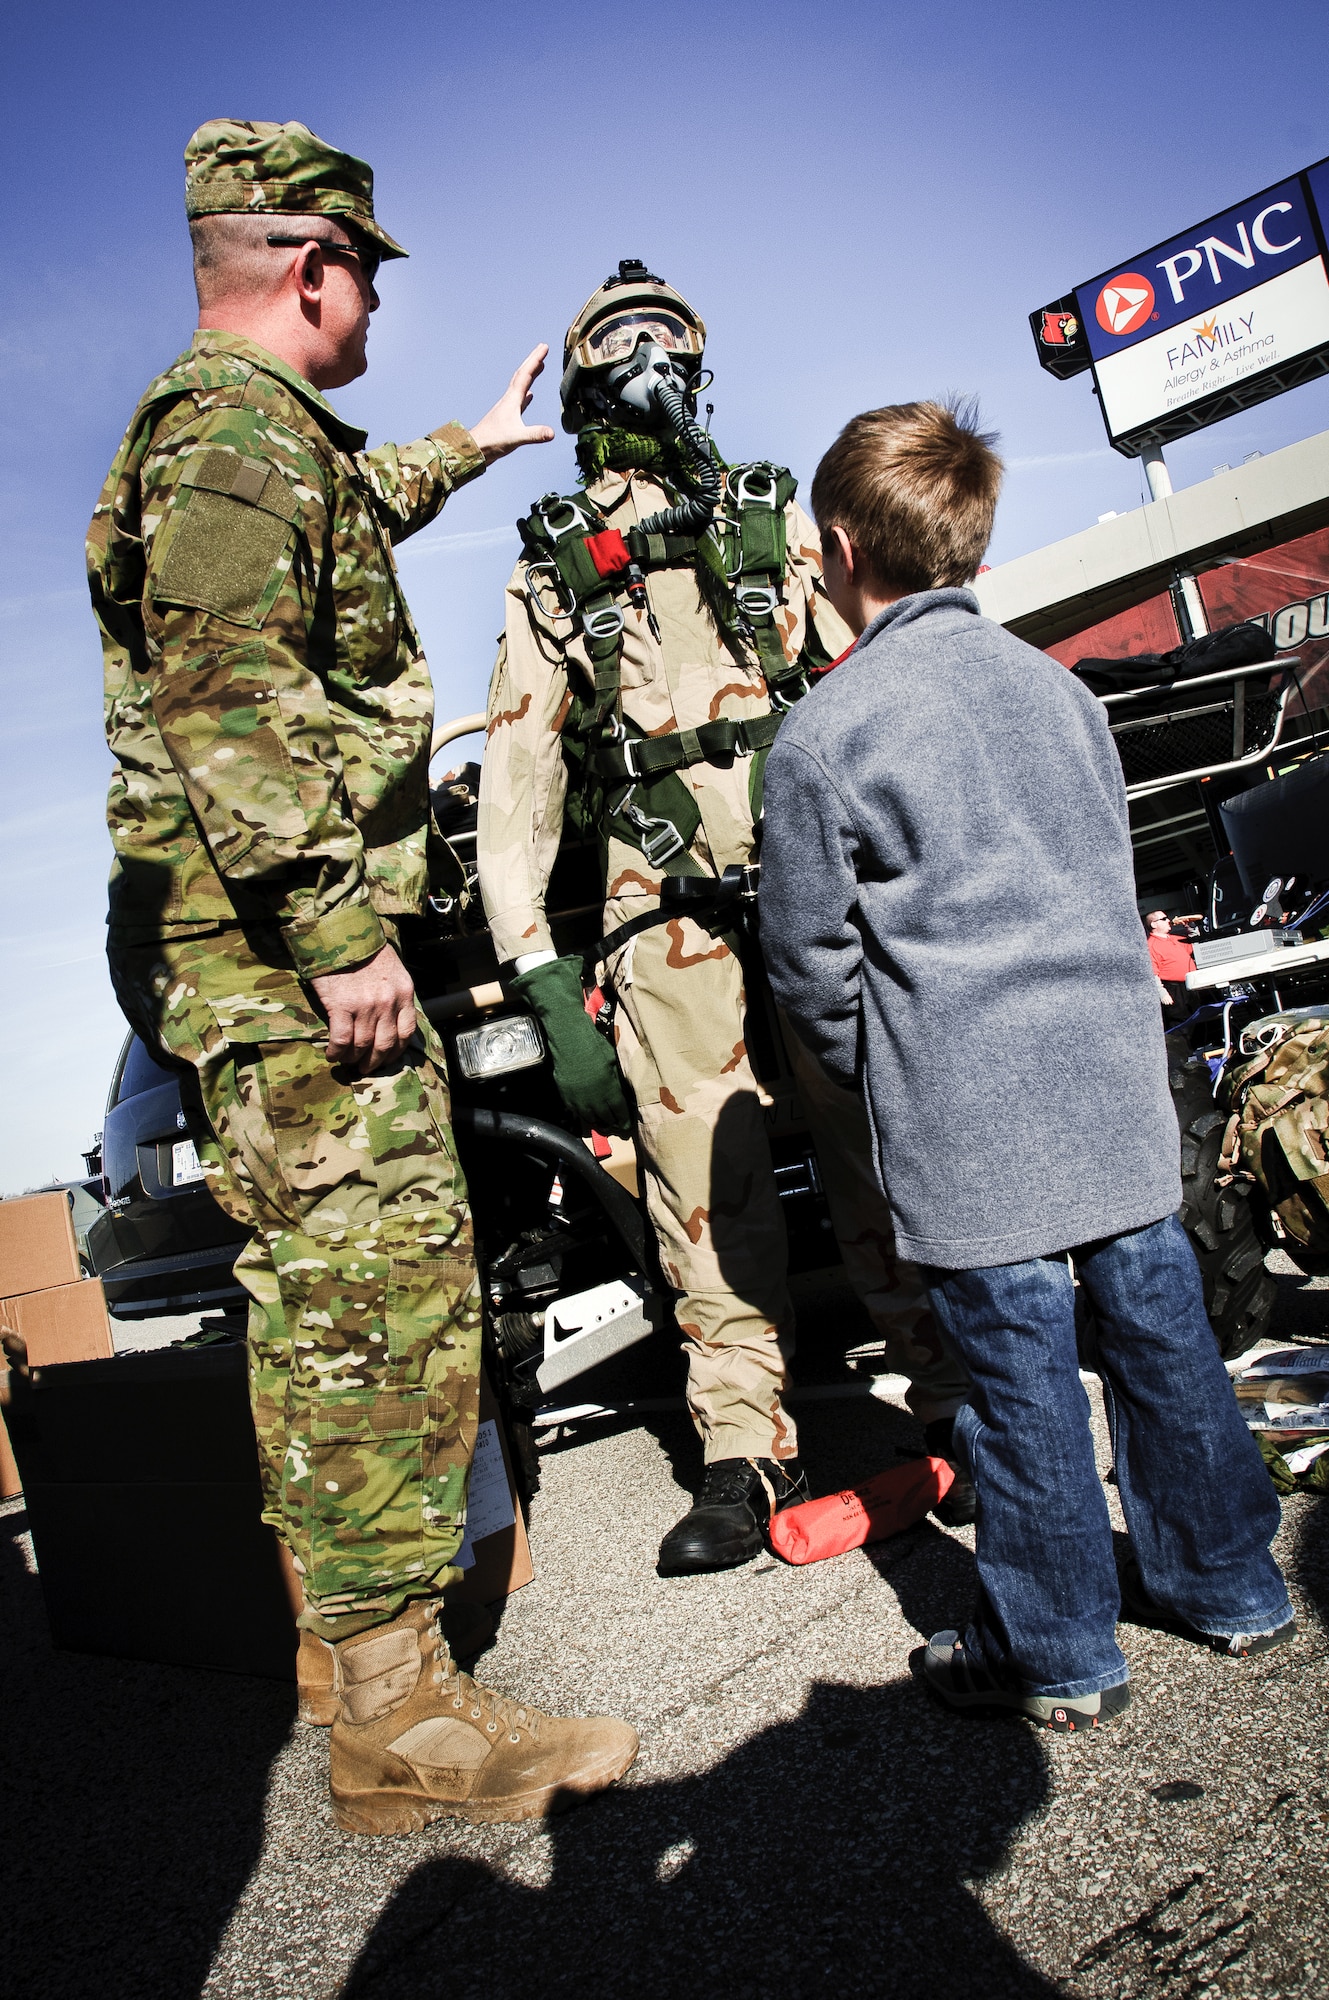 Tech. Sgt. Jason Likens of the Kentucky Air National Guard's 123rd Special Tactics Squadron explains high-altitude parachute gear to a potential recruit Nov. 12, 2011, at U of L Cardinal Stadium in Louisville, Ky. The display was held in conjunction with the school's annual Military Appreciation Day, which took place this year on the same day as the U of L - Pittsburgh football game. (U.S. Air Force photo by Senior Airman Maxwell Rechel)